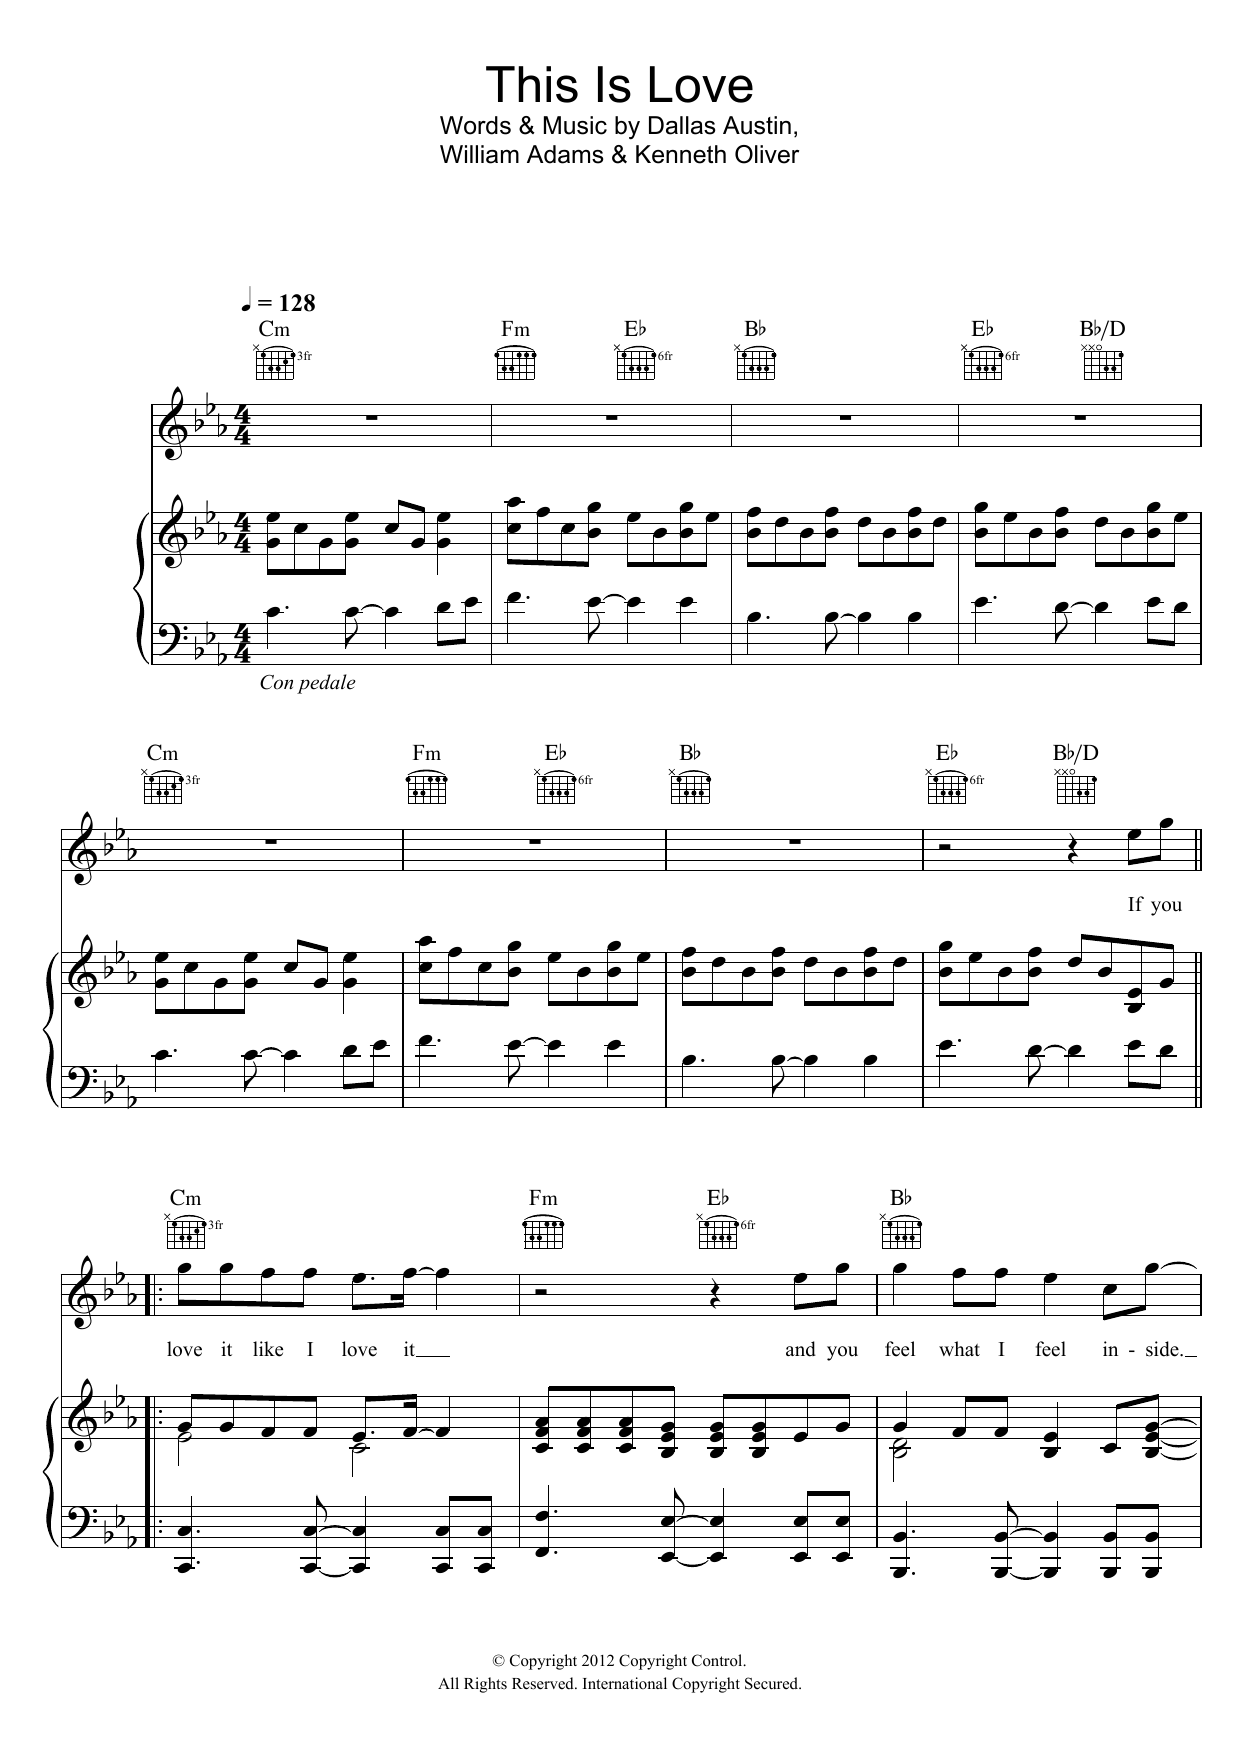 Download will.i.am This Is Love Sheet Music